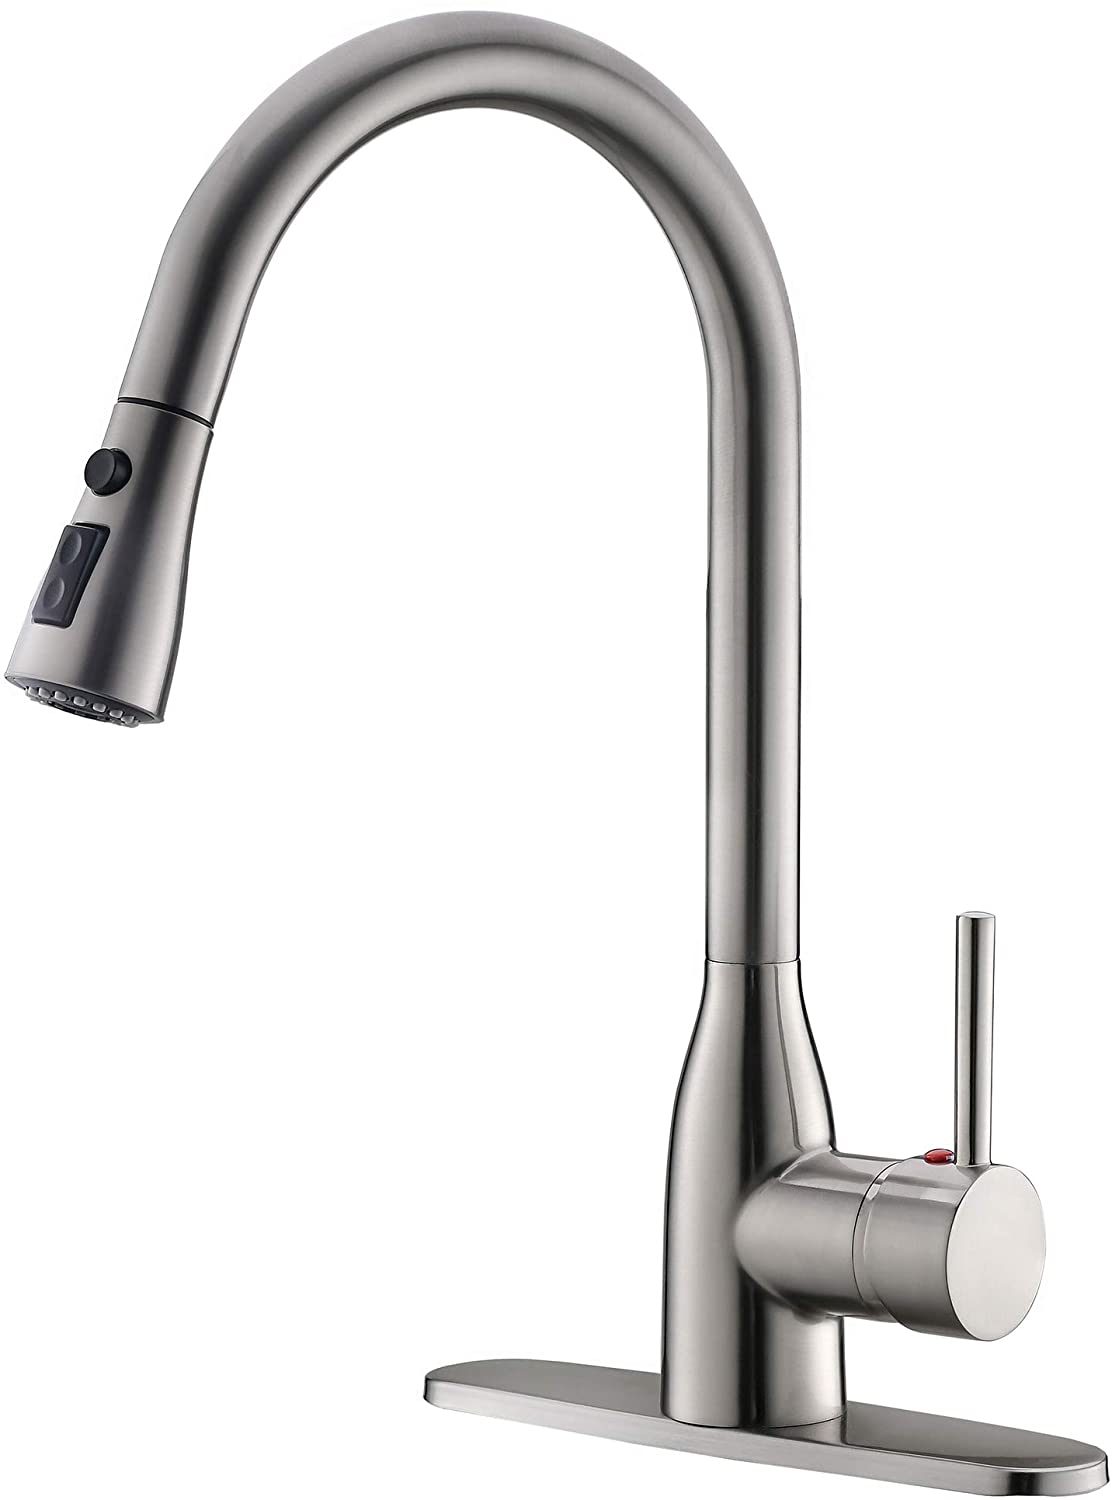 Ufaucet Single-Handle Pull-Down Spray Kitchen Faucet